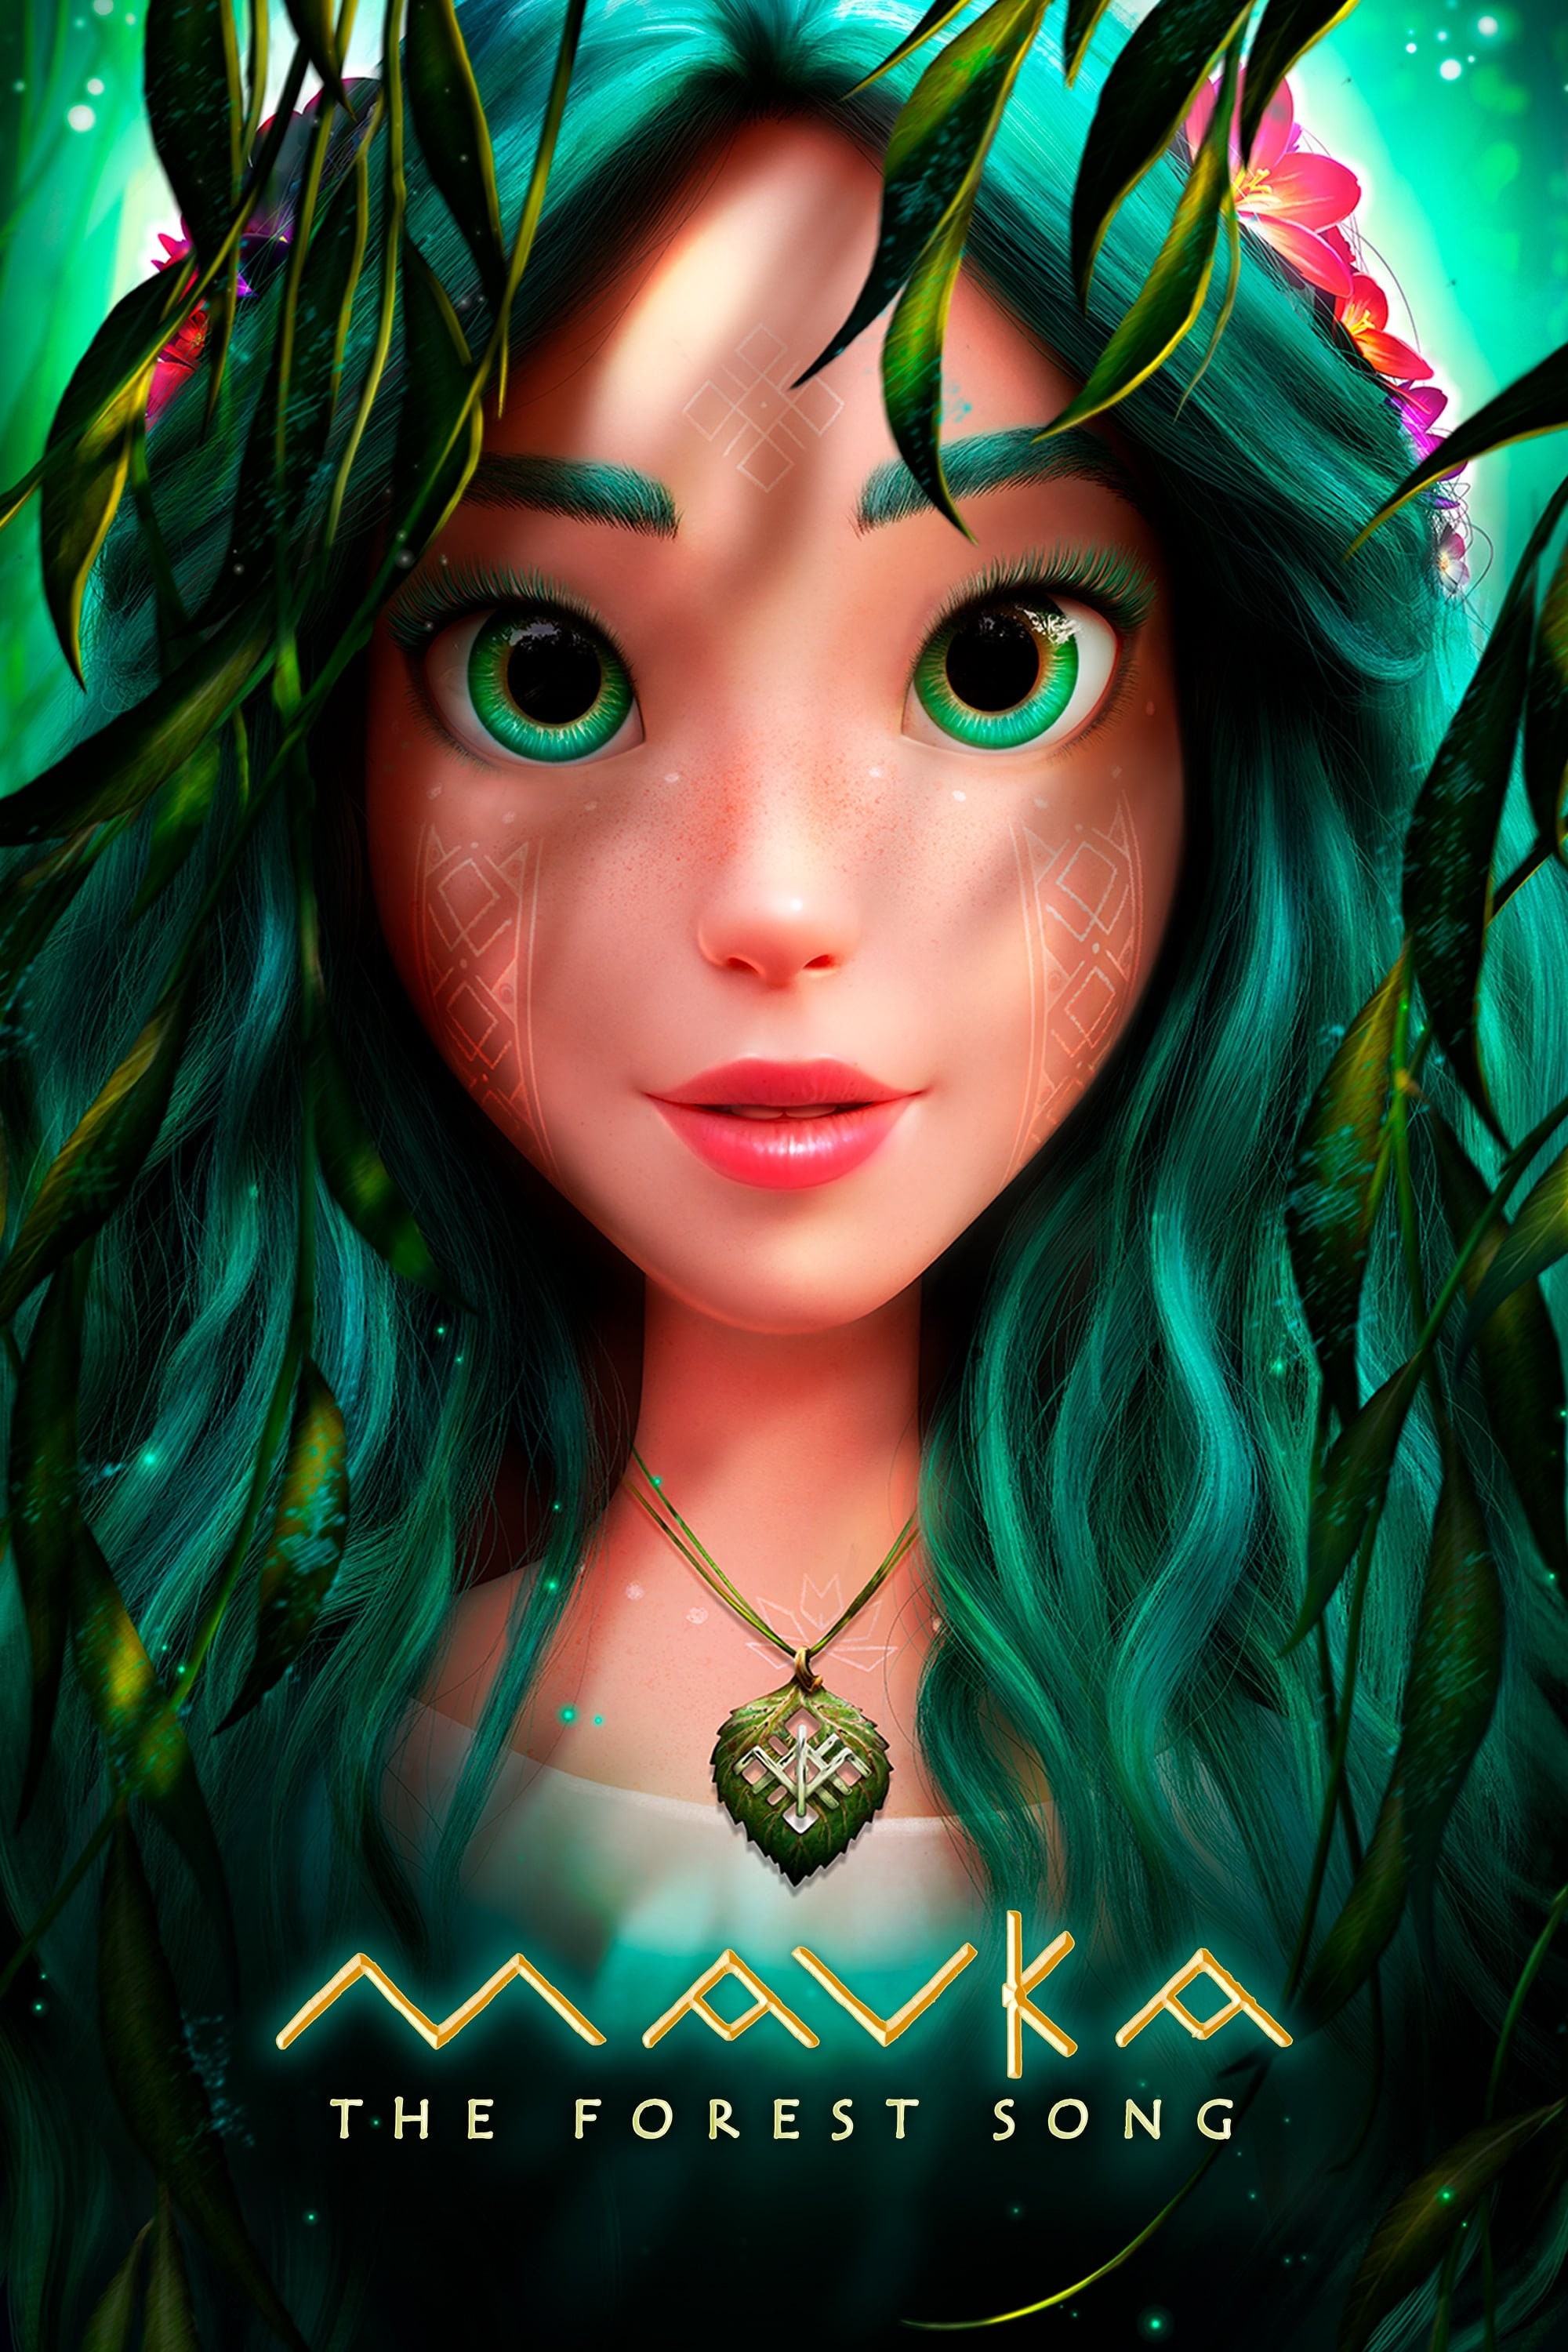 Mavka The Forest Song 2023 DVD Cover by CoverAddict on DeviantArt